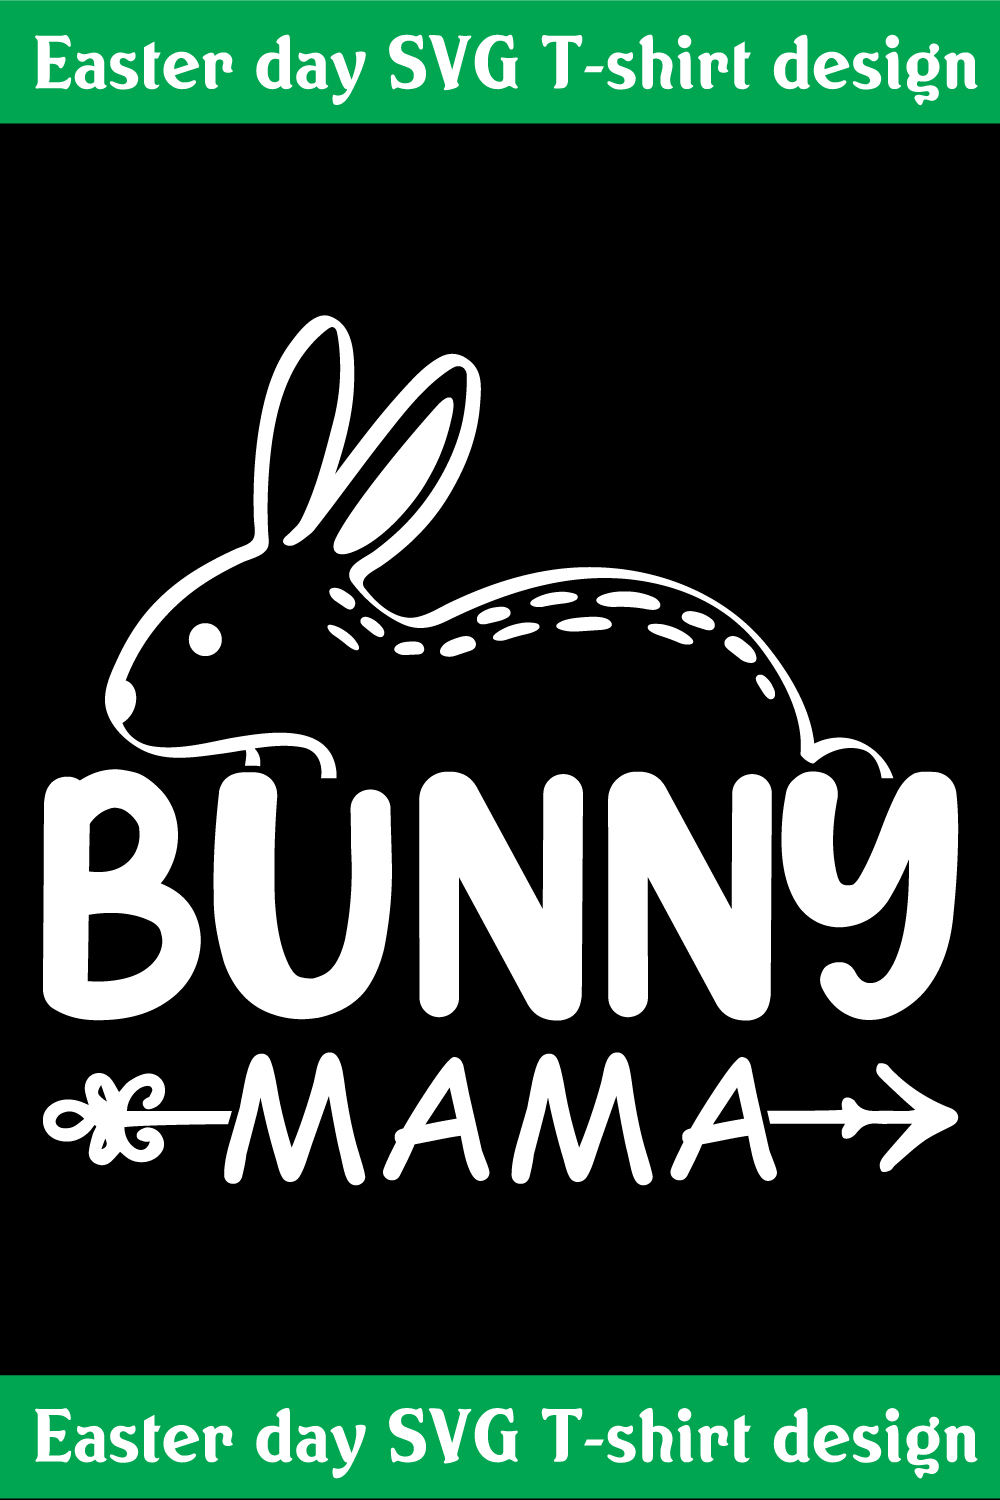 Bunny mama Easter Day printable T-Shirt pinterest preview image.